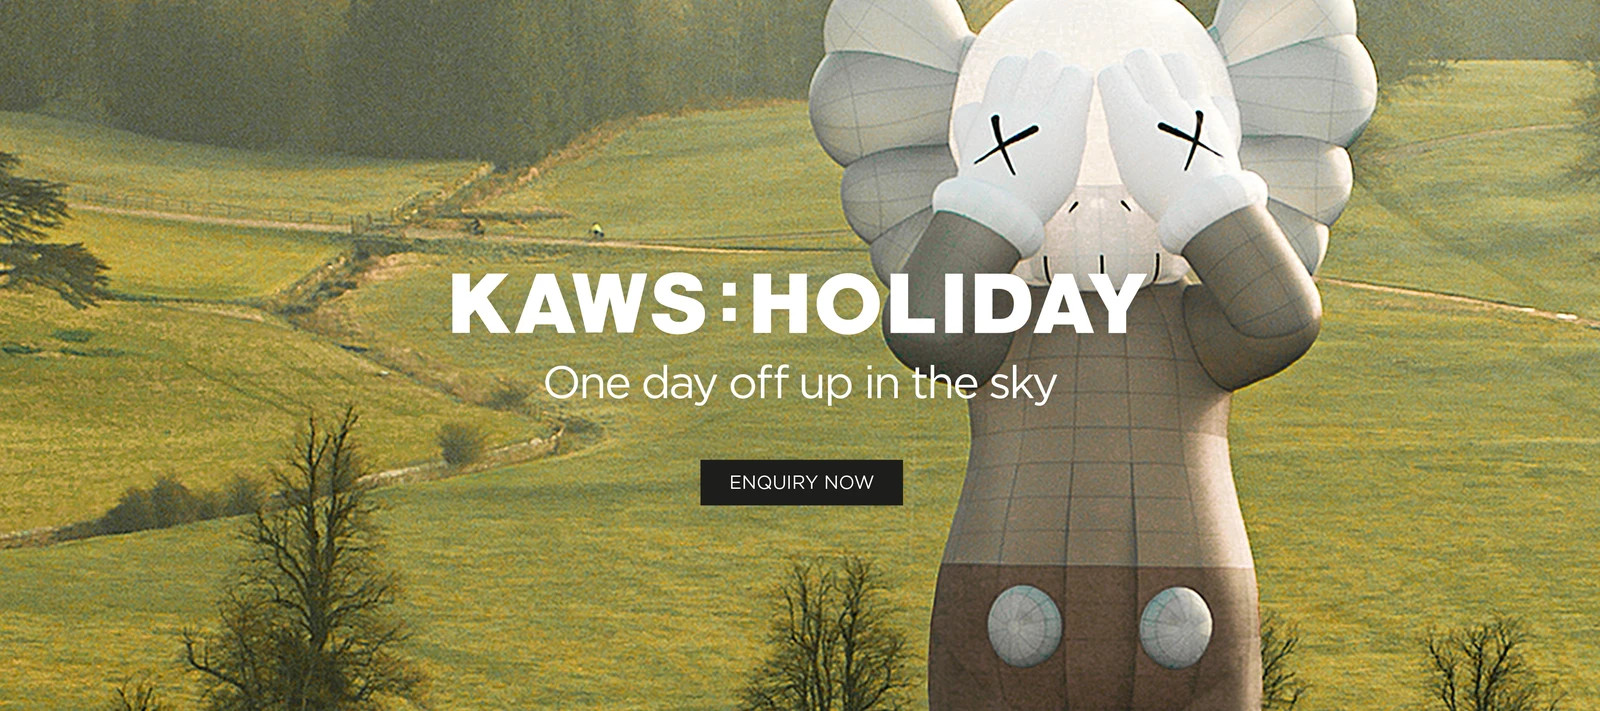 The image advertising KAWS's new project at ddtstore.com